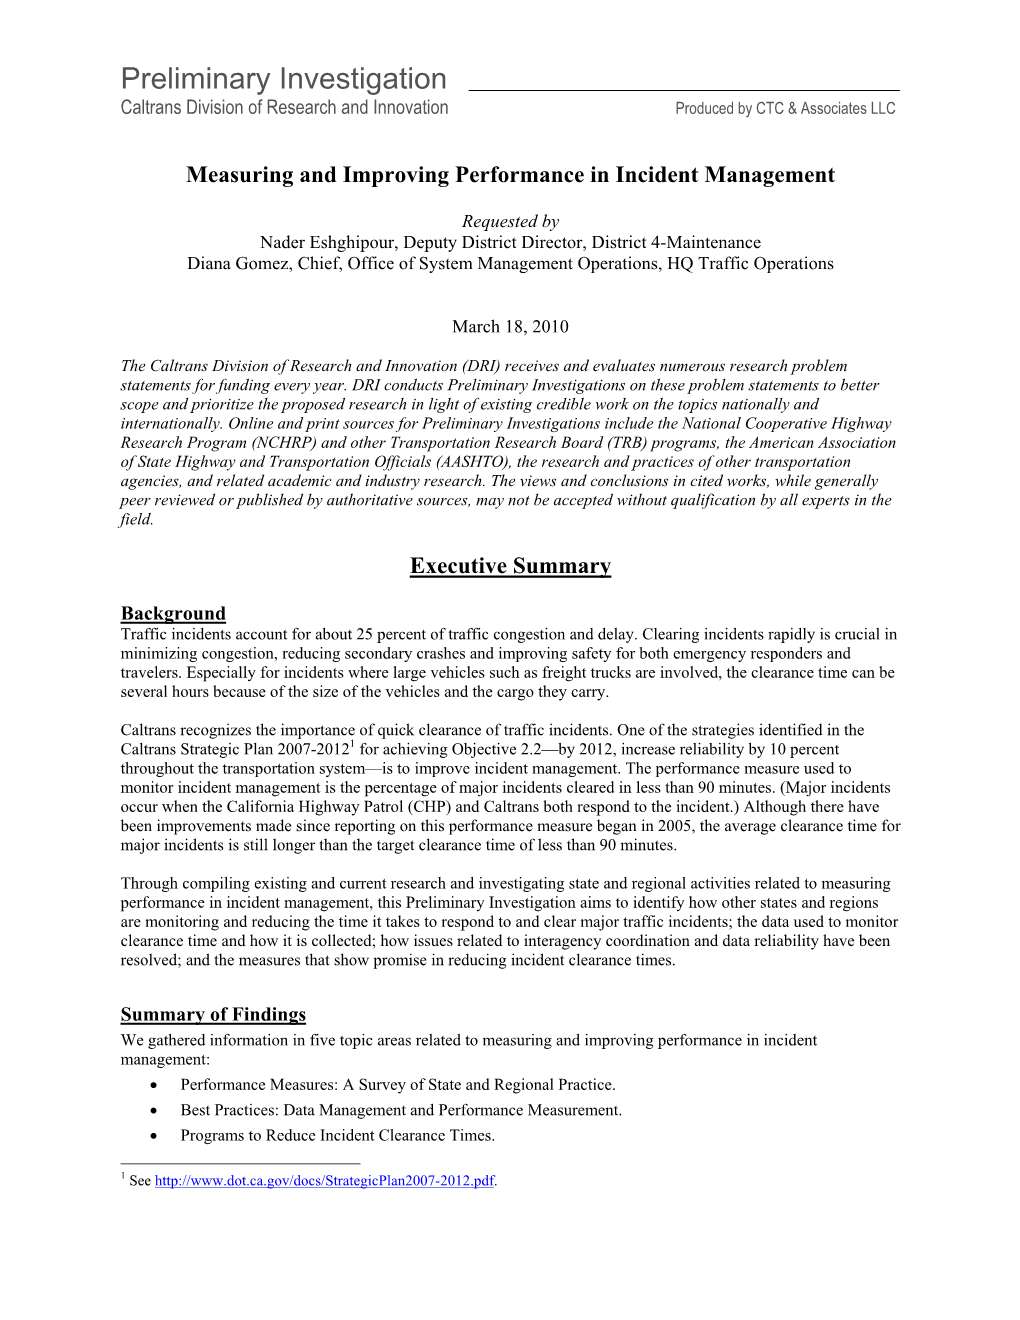 Measuring and Improving Performance in Incident Management